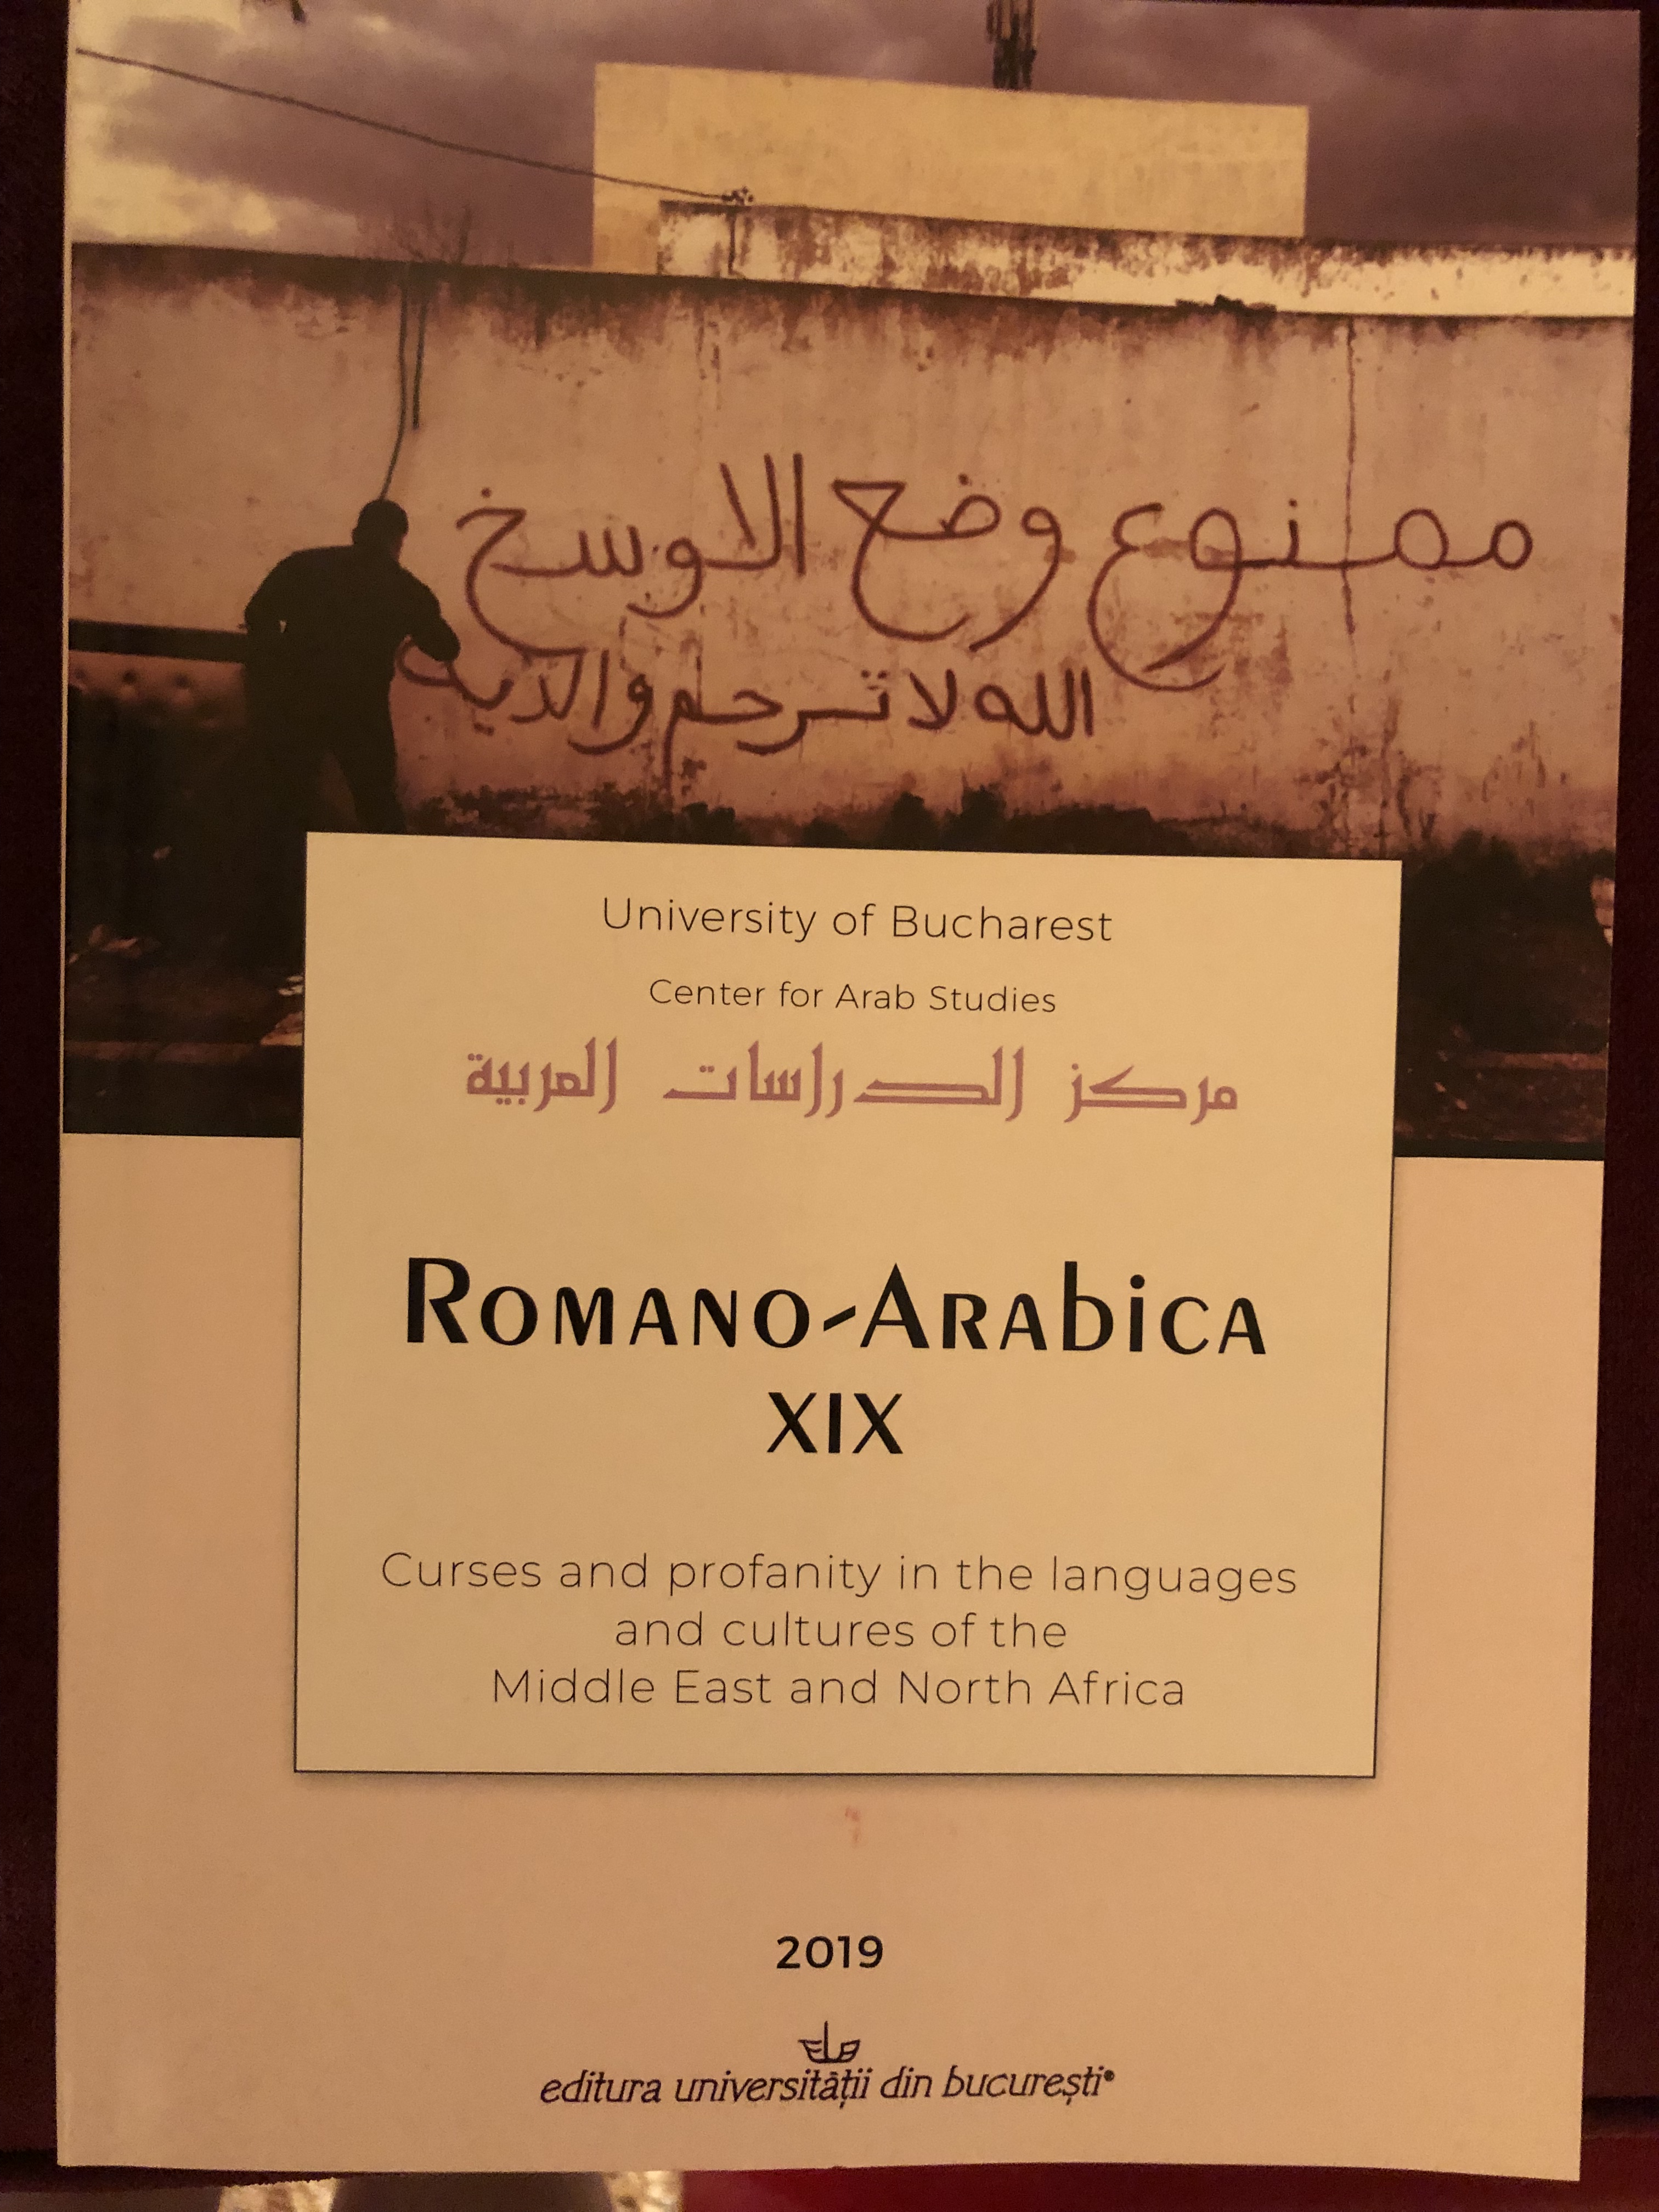 THE USE OF YOUTH LANGUAGE AND COARSE WORDS
IN THE MASHREQ AREA Cover Image